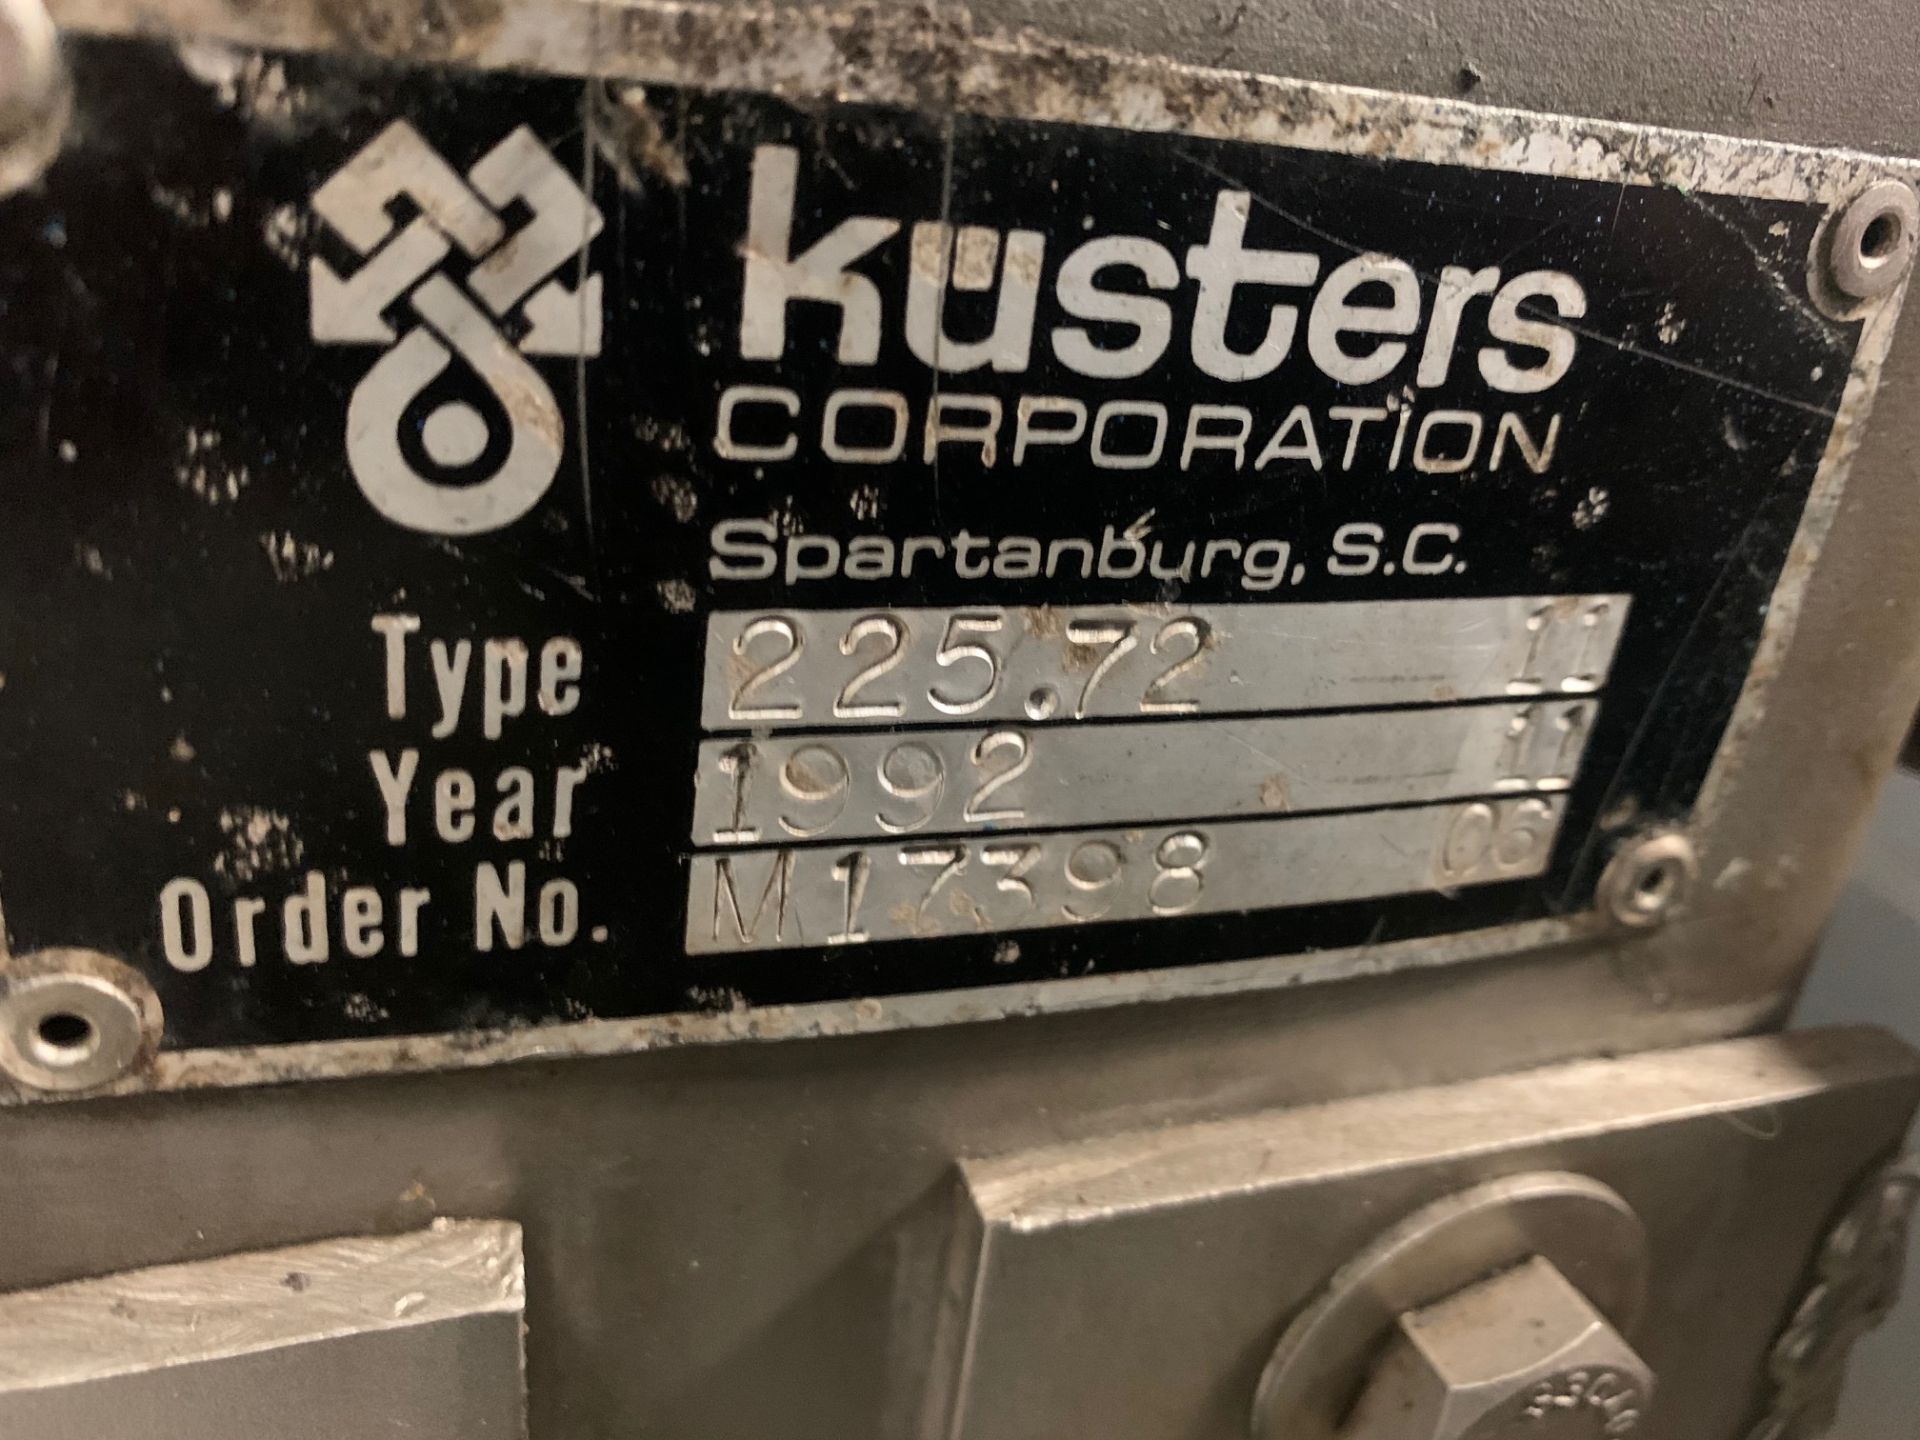 Kusters Co. Pad Machine, Type# 225.72, Order# M17398, Year 1992, Rigging Fee $75 - Image 3 of 6